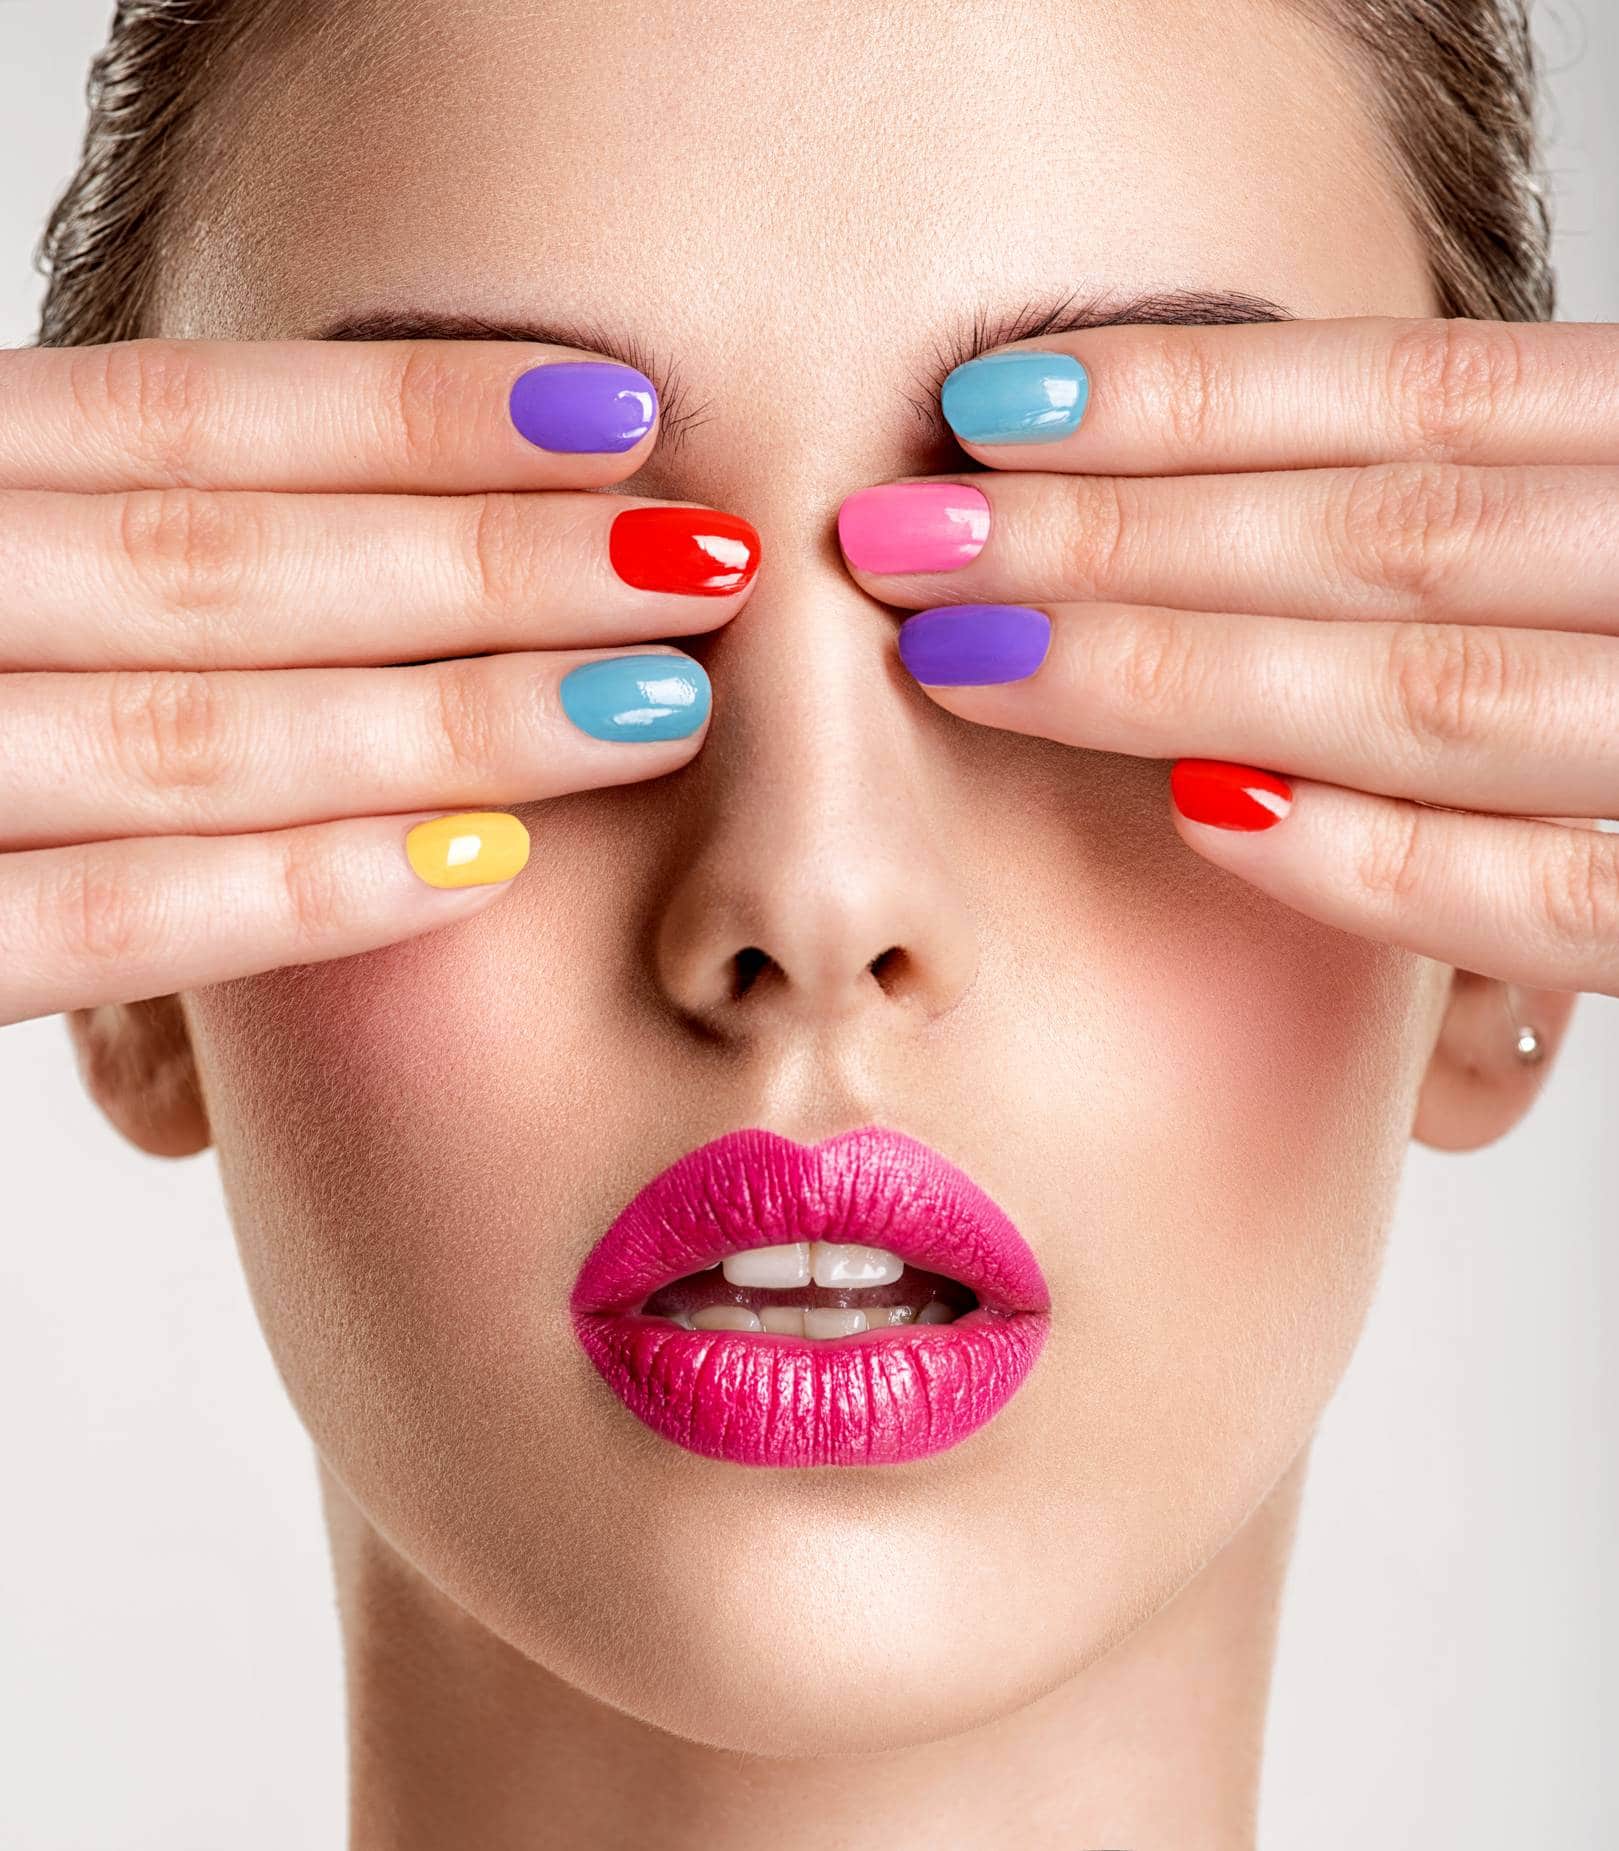 Comment payer moins cher son vernis ?